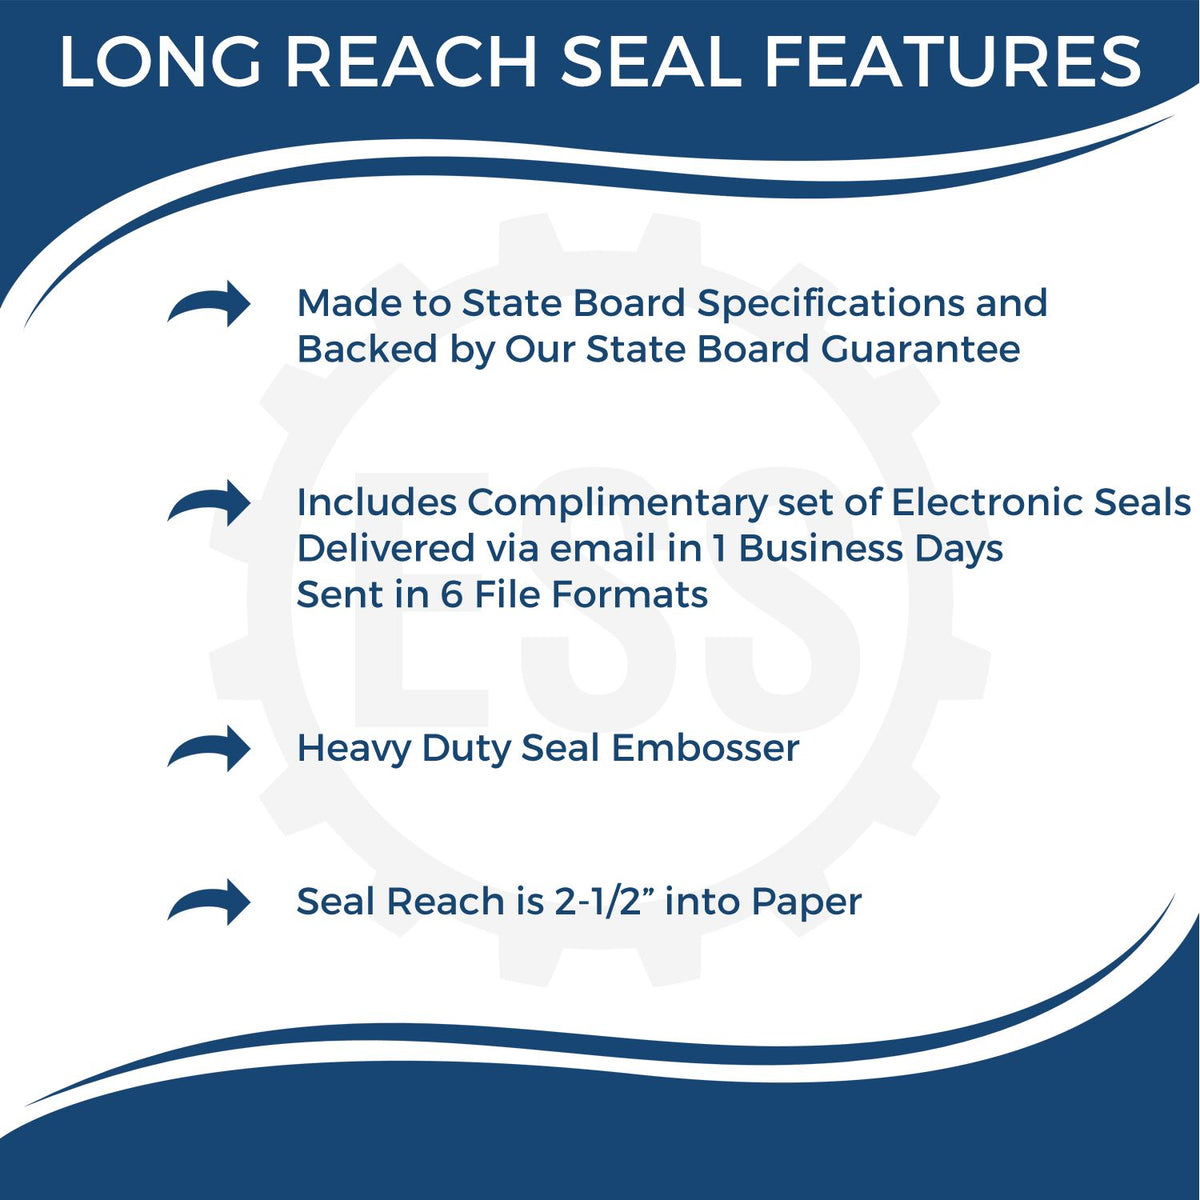 A picture of an infographic highlighting the selling points for the Long Reach California PE Seal